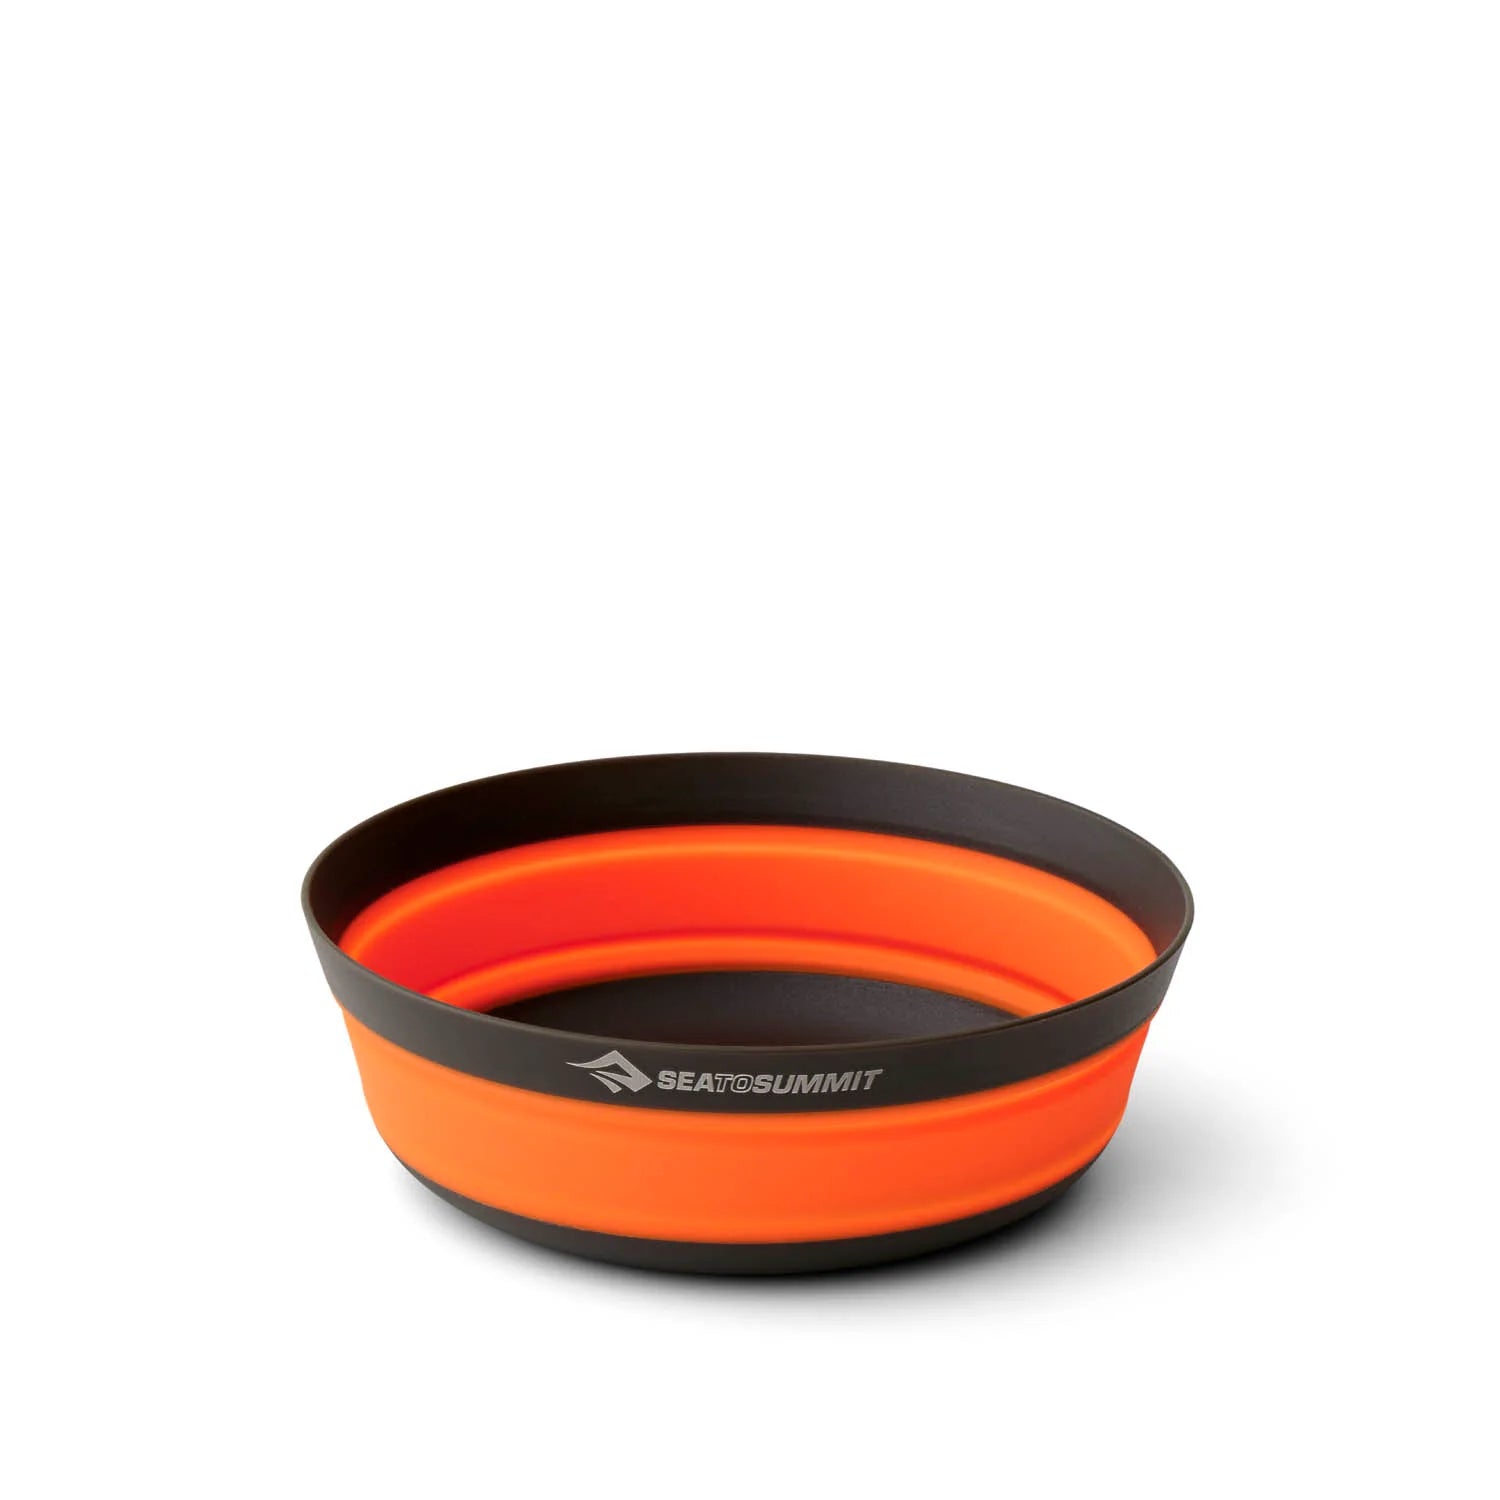 Sea To Summit Frontier UL Collapsible Bowl - M - Orange